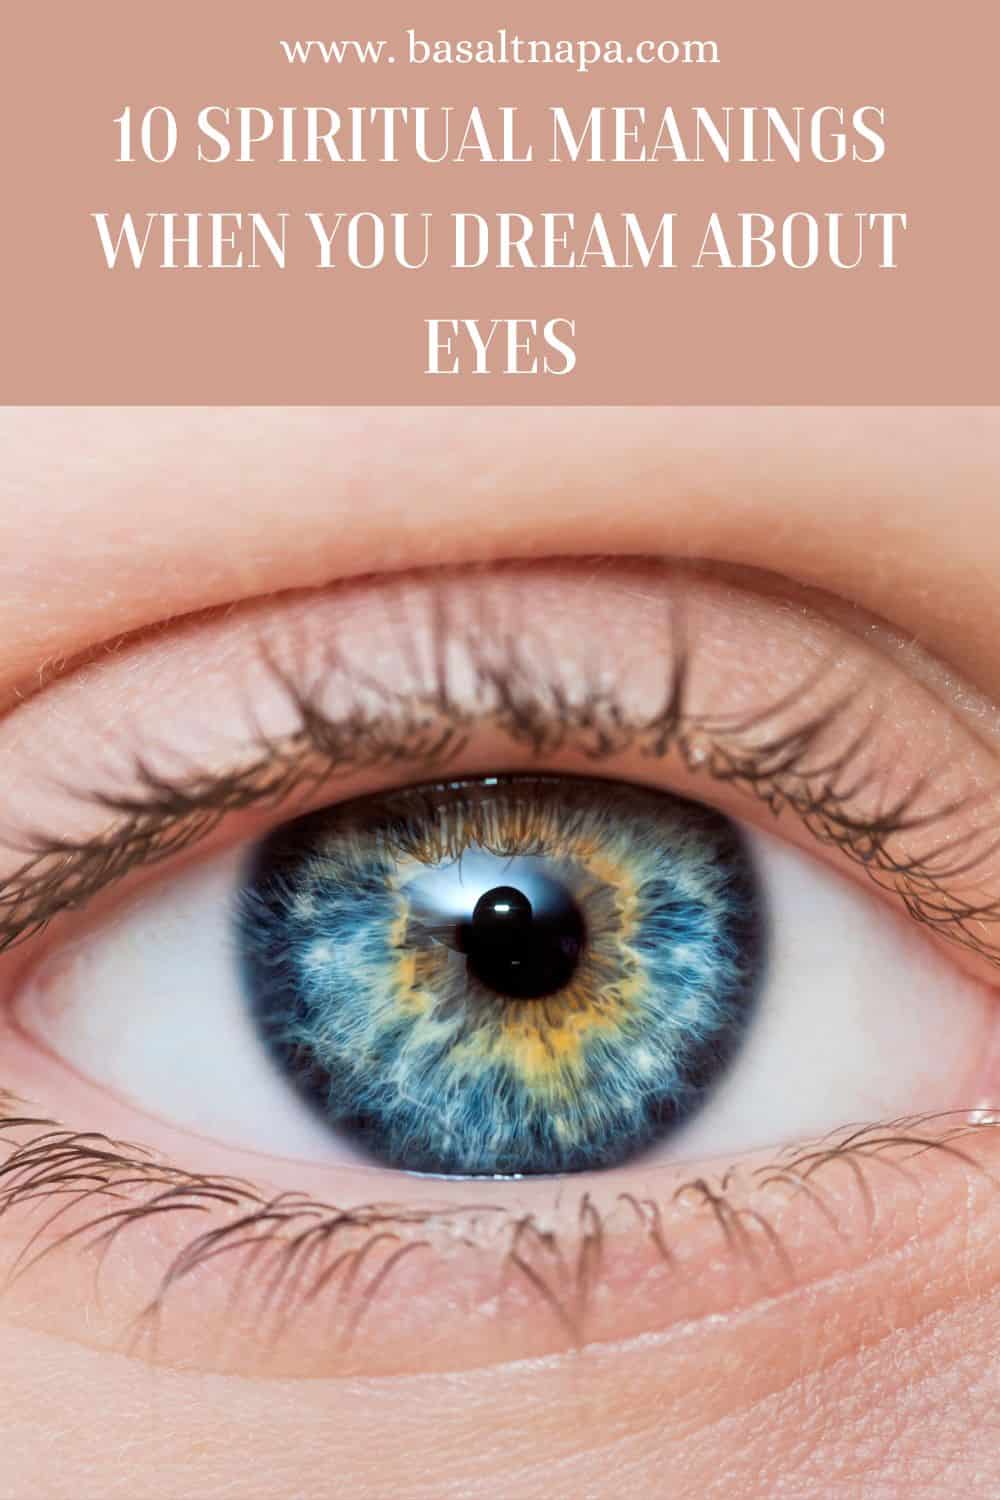 10 Spiritual Meanings When You Dream About Eyes